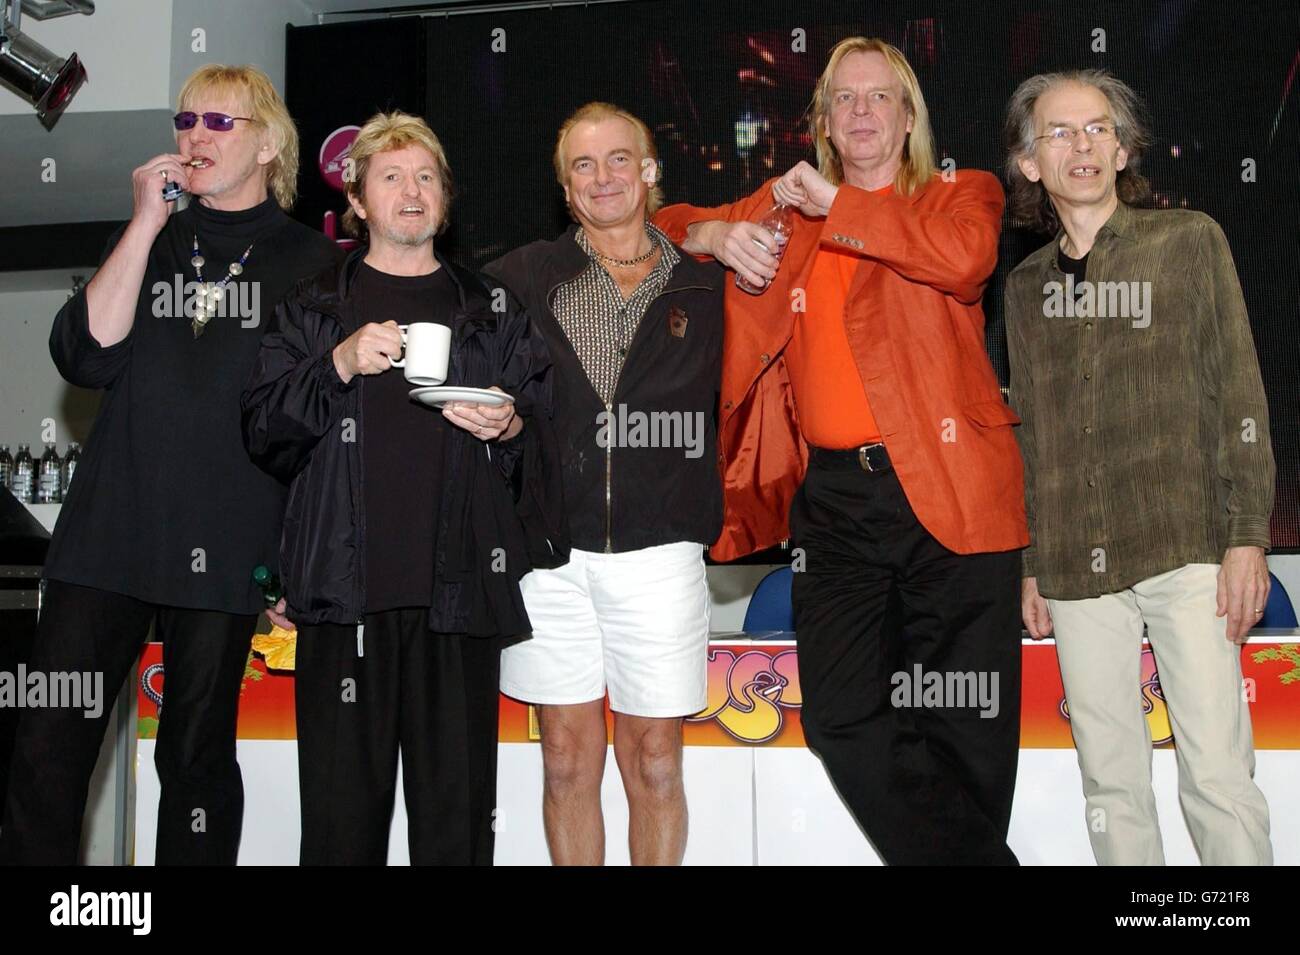 70s rock band Yes (left-right) Chris Squire, Jon Anderson, Alan White, Rick Wakeman and Steve Howe during a in-store signing for their new DVD 'Yes Acoustic', at HMV Oxford Street, central London. Stock Photo